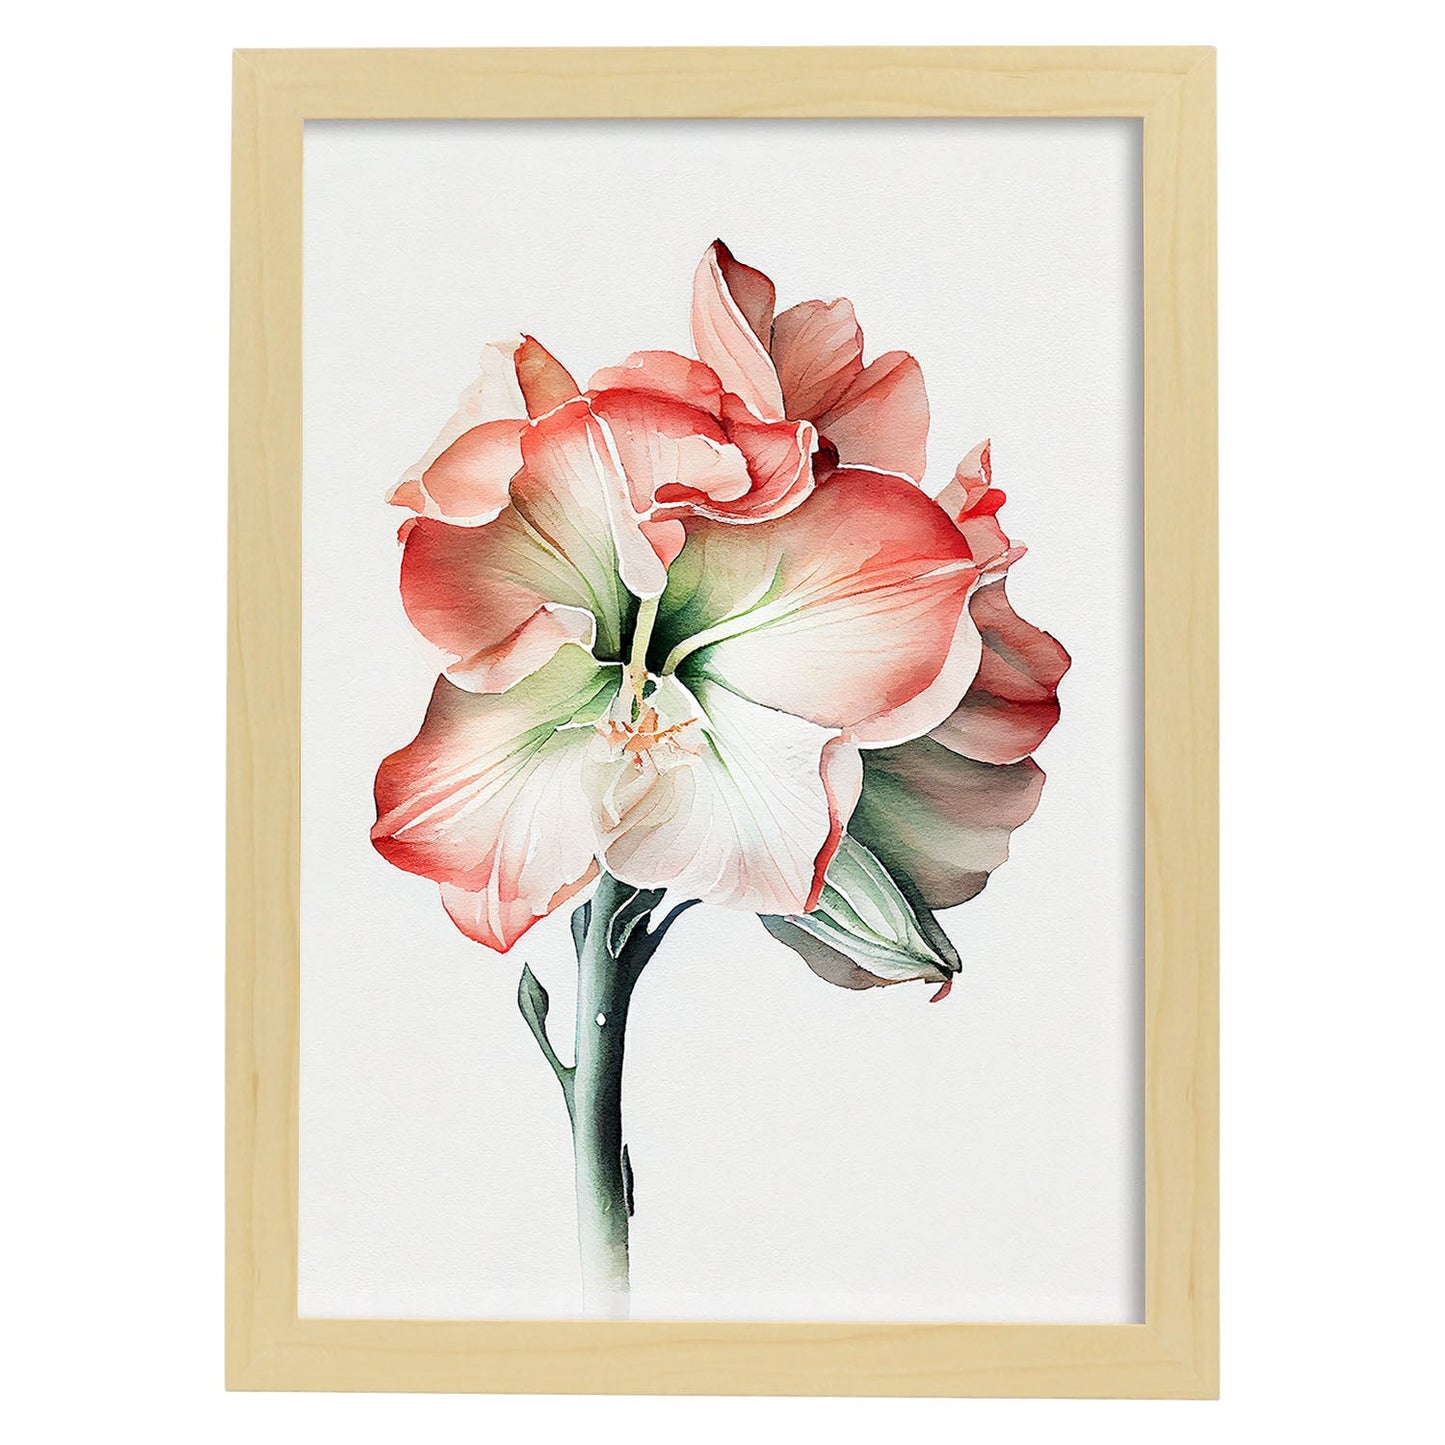 Nacnic watercolor minmal Amaryllis. Aesthetic Wall Art Prints for Bedroom or Living Room Design.